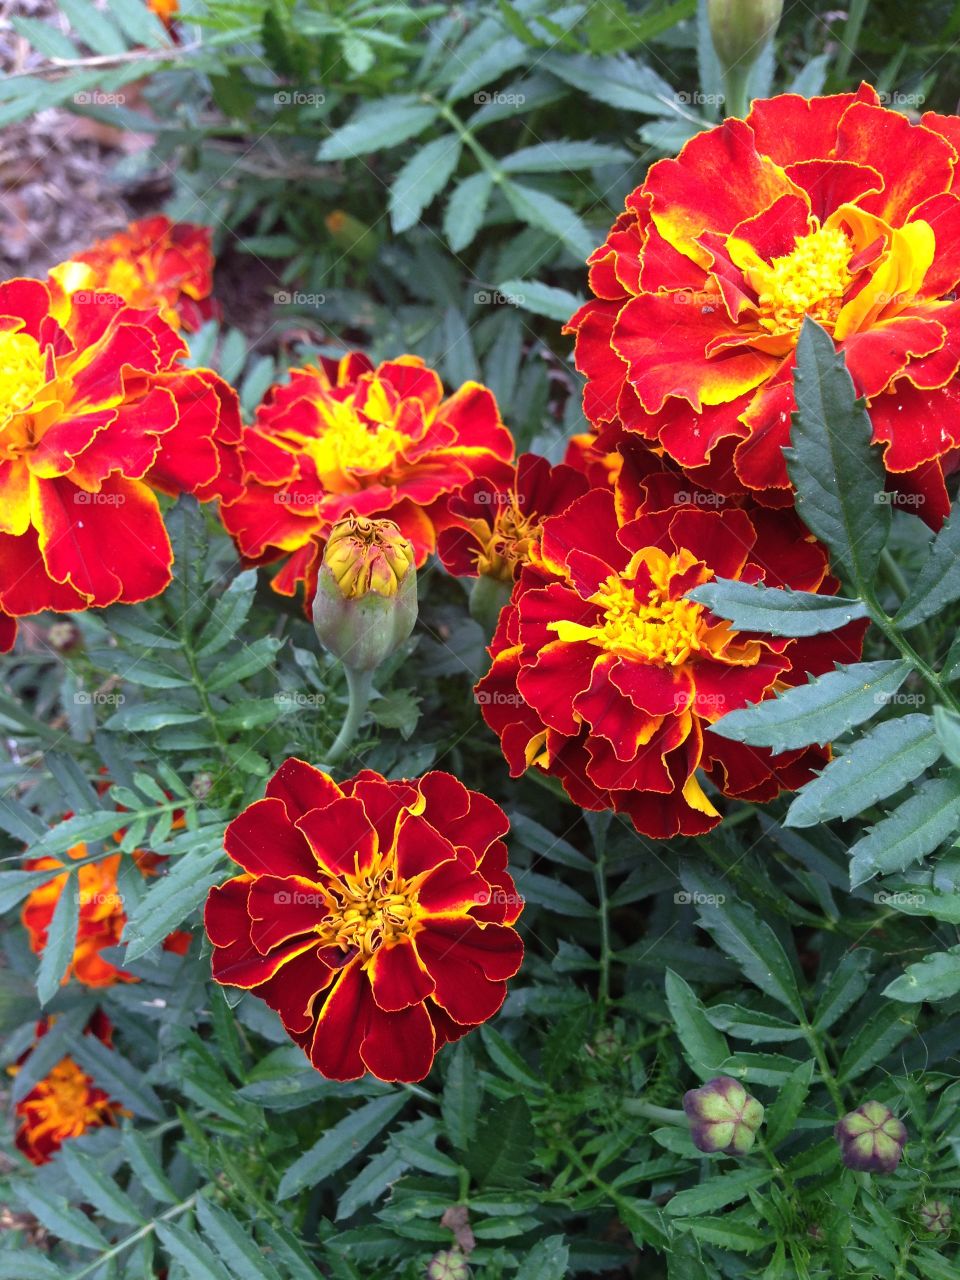 Marigolds. Flowers in my garden with fall colors